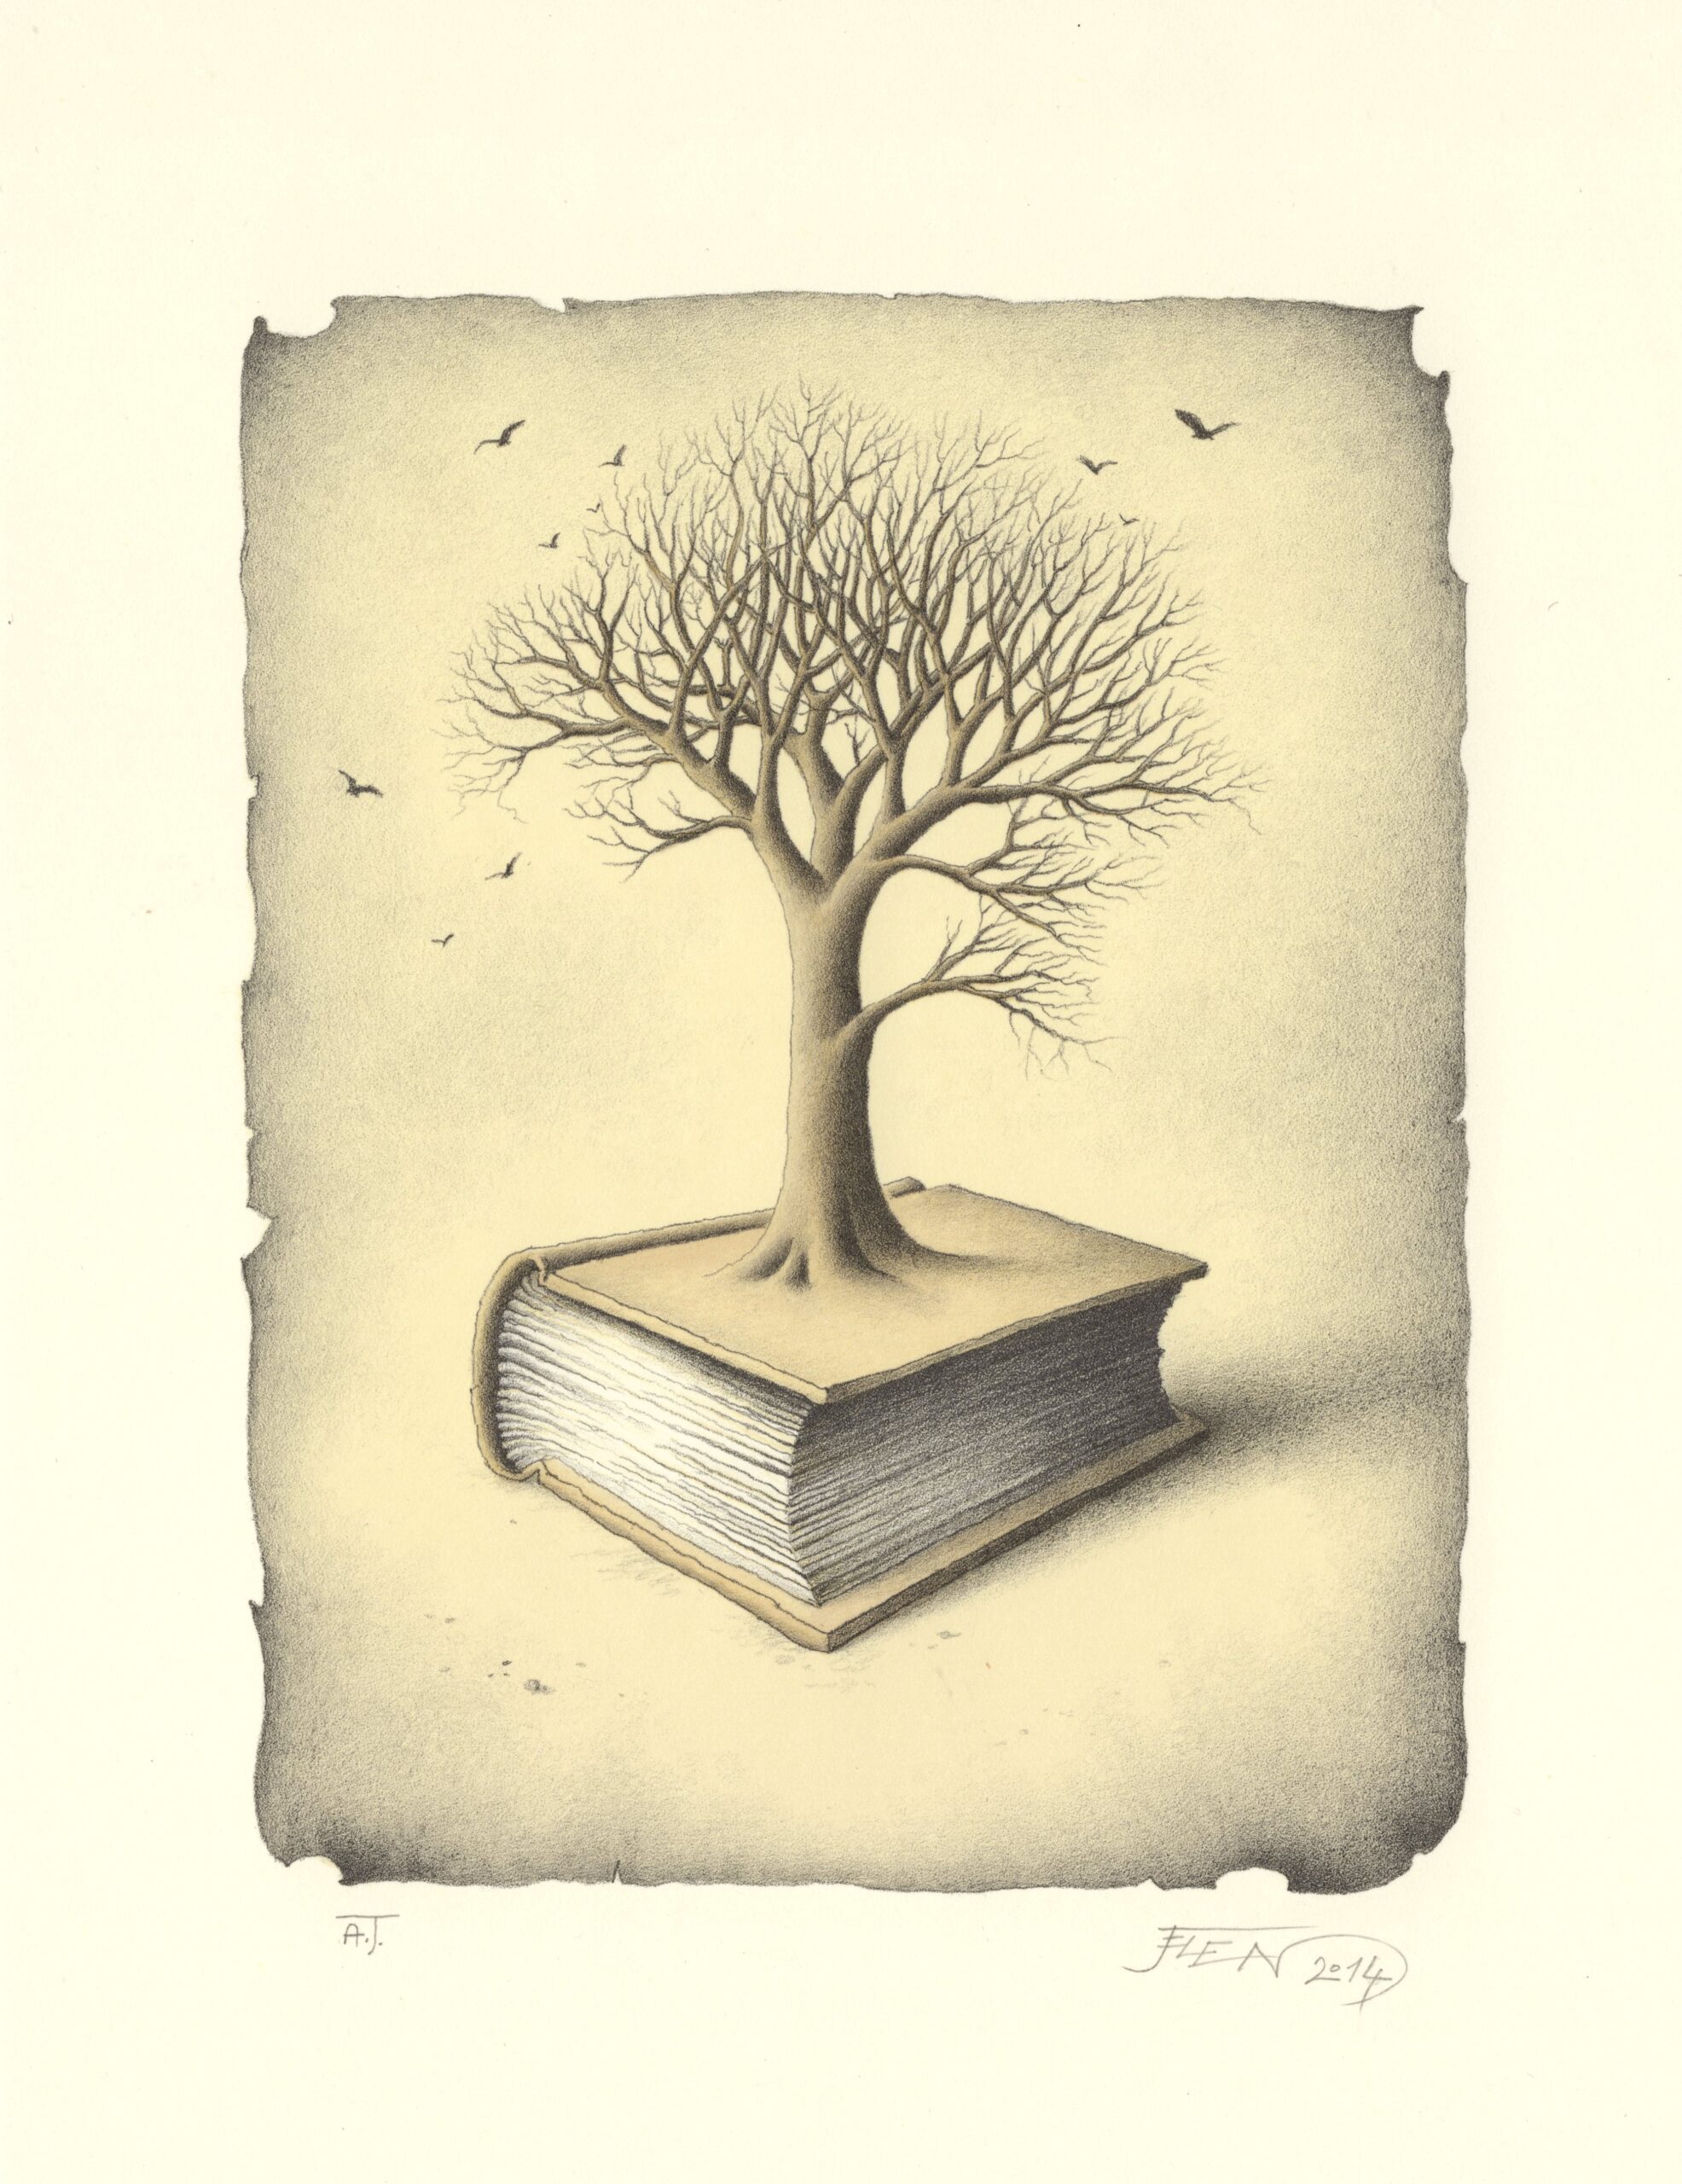 2014 Strom na knize / Tree on the book litography